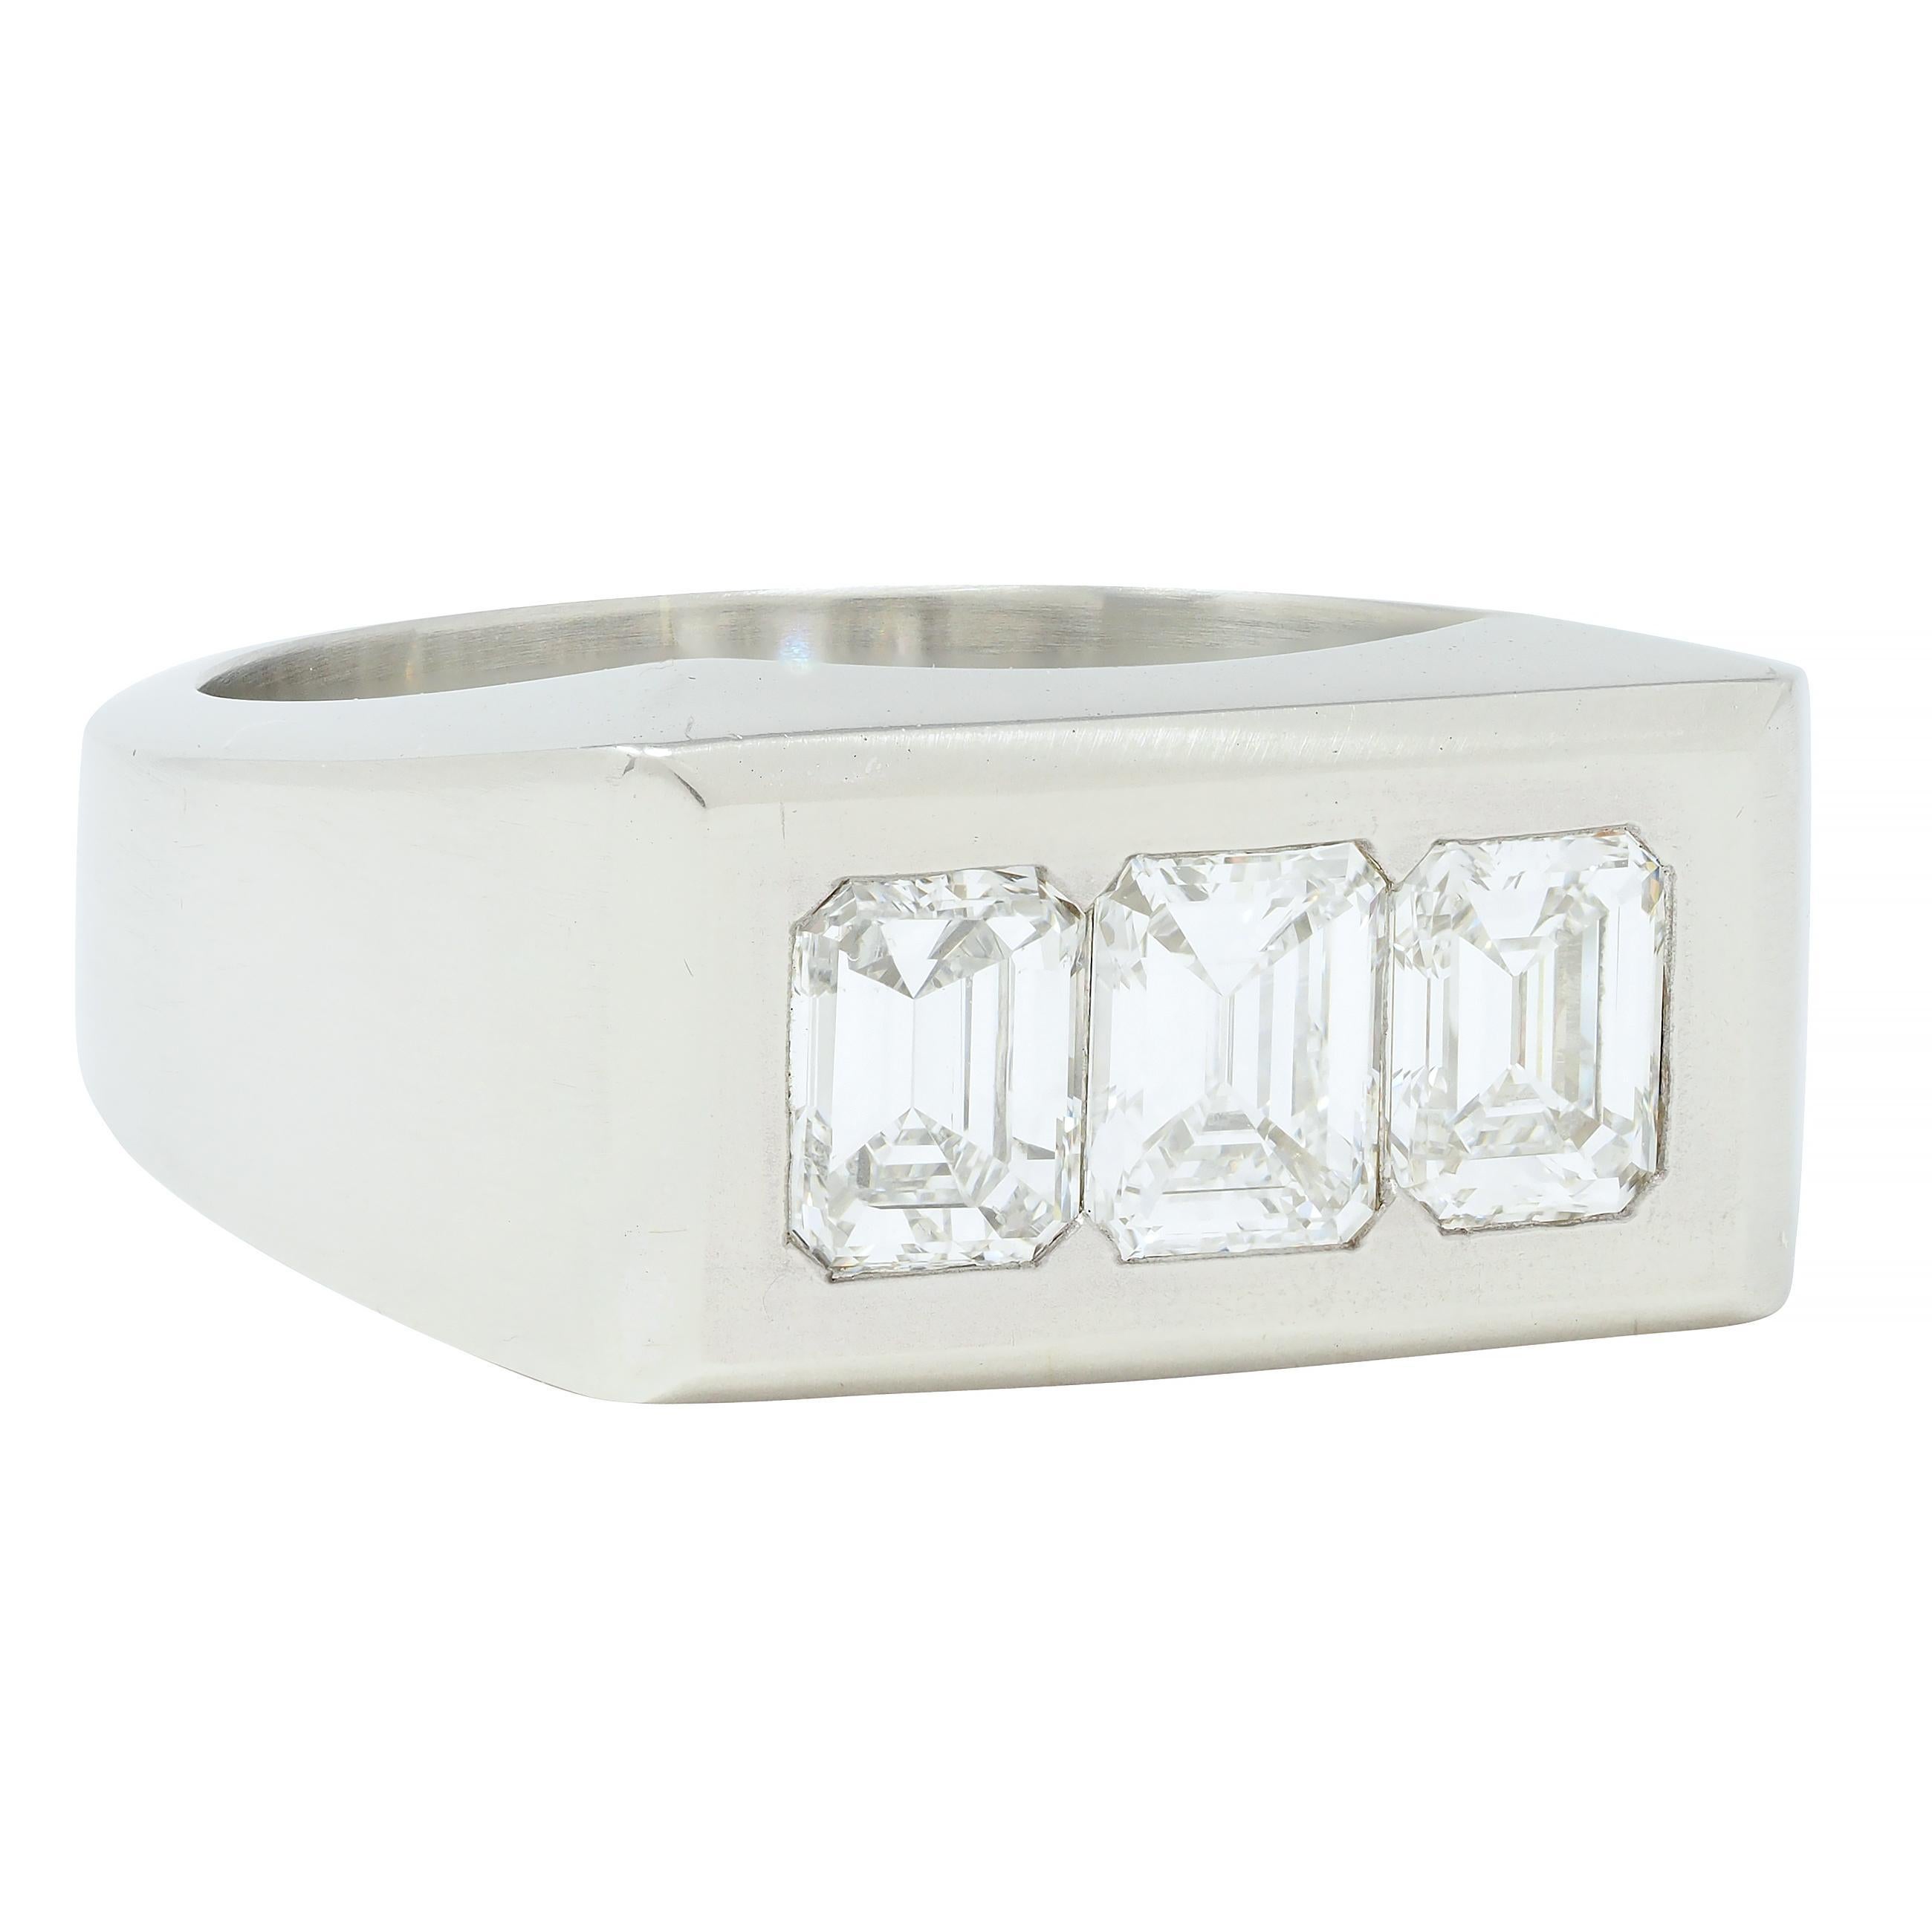 Centering three emerald cut diamonds weighing approximately 1.50 carats total 
F/G color with VS clarity - flush set to front
With high polished rectangular surround 
Stamped for 18 karat gold
With maker's mark
Circa: 1950s
Ring size: 8 and sizable